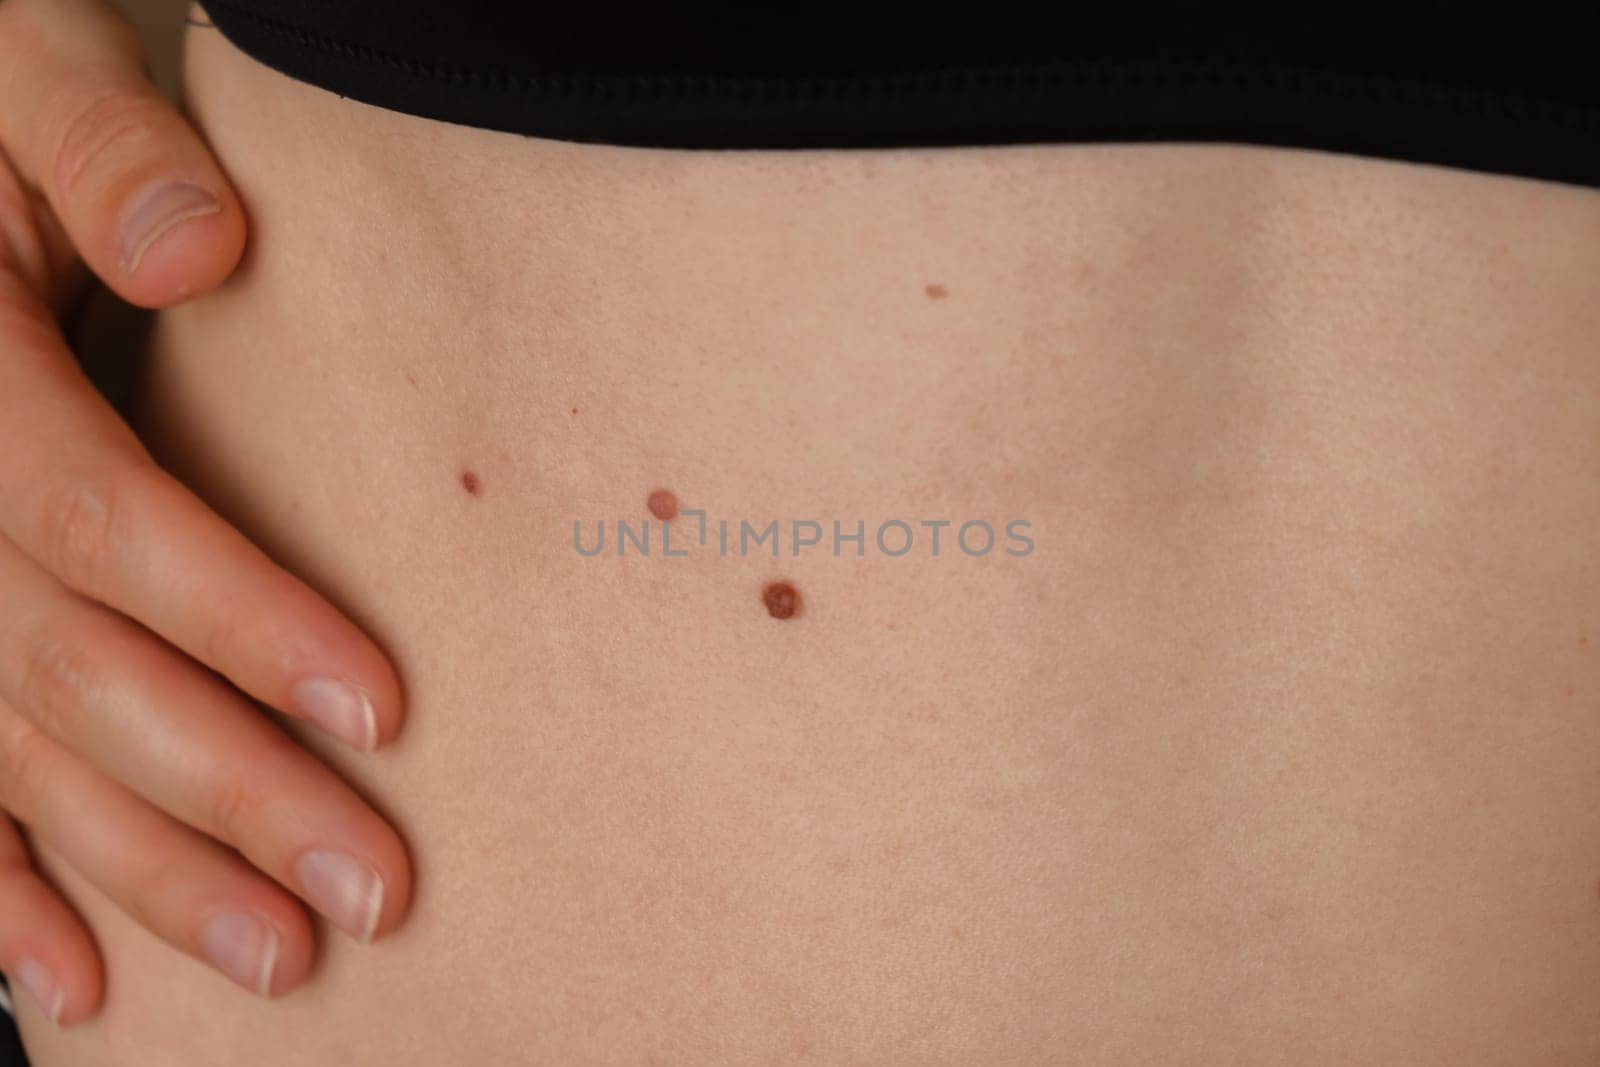 Unrecognizable woman showing her Birthmarks on skin Close up detail of the bare skin Sun Exposure effect on skin, Health Effects of UV Radiation Woman with birthmarks Pigmentation and lot of birthmarks